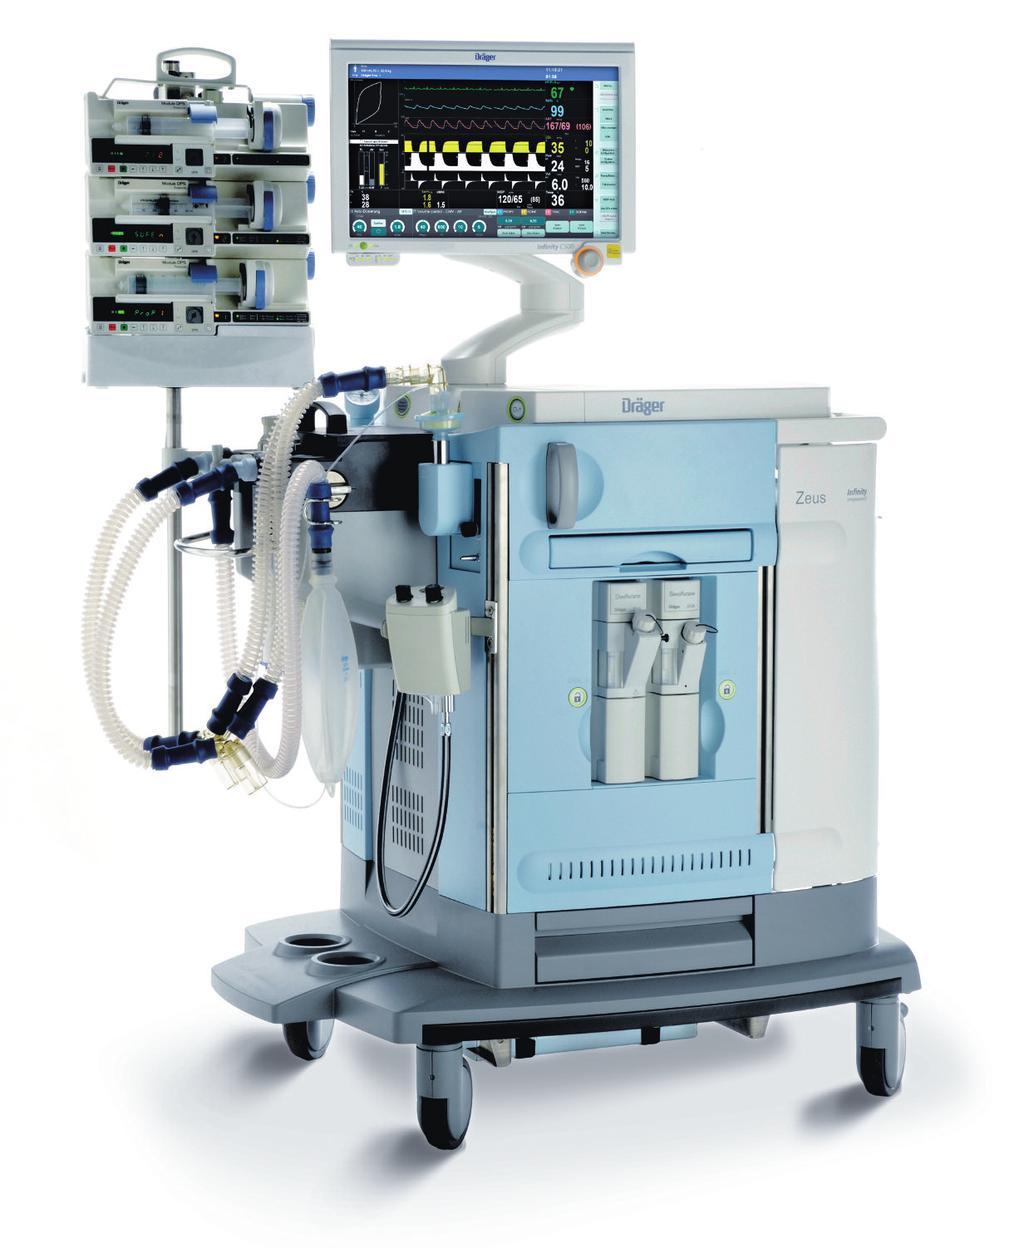 DRÄGER ZEUS INFINITY EMPOWERED 05 DRÄGER ZEUS INFINITY EMPOWERED Touchscreen IV-pumps Breathing system with APL-valve O 2 flow